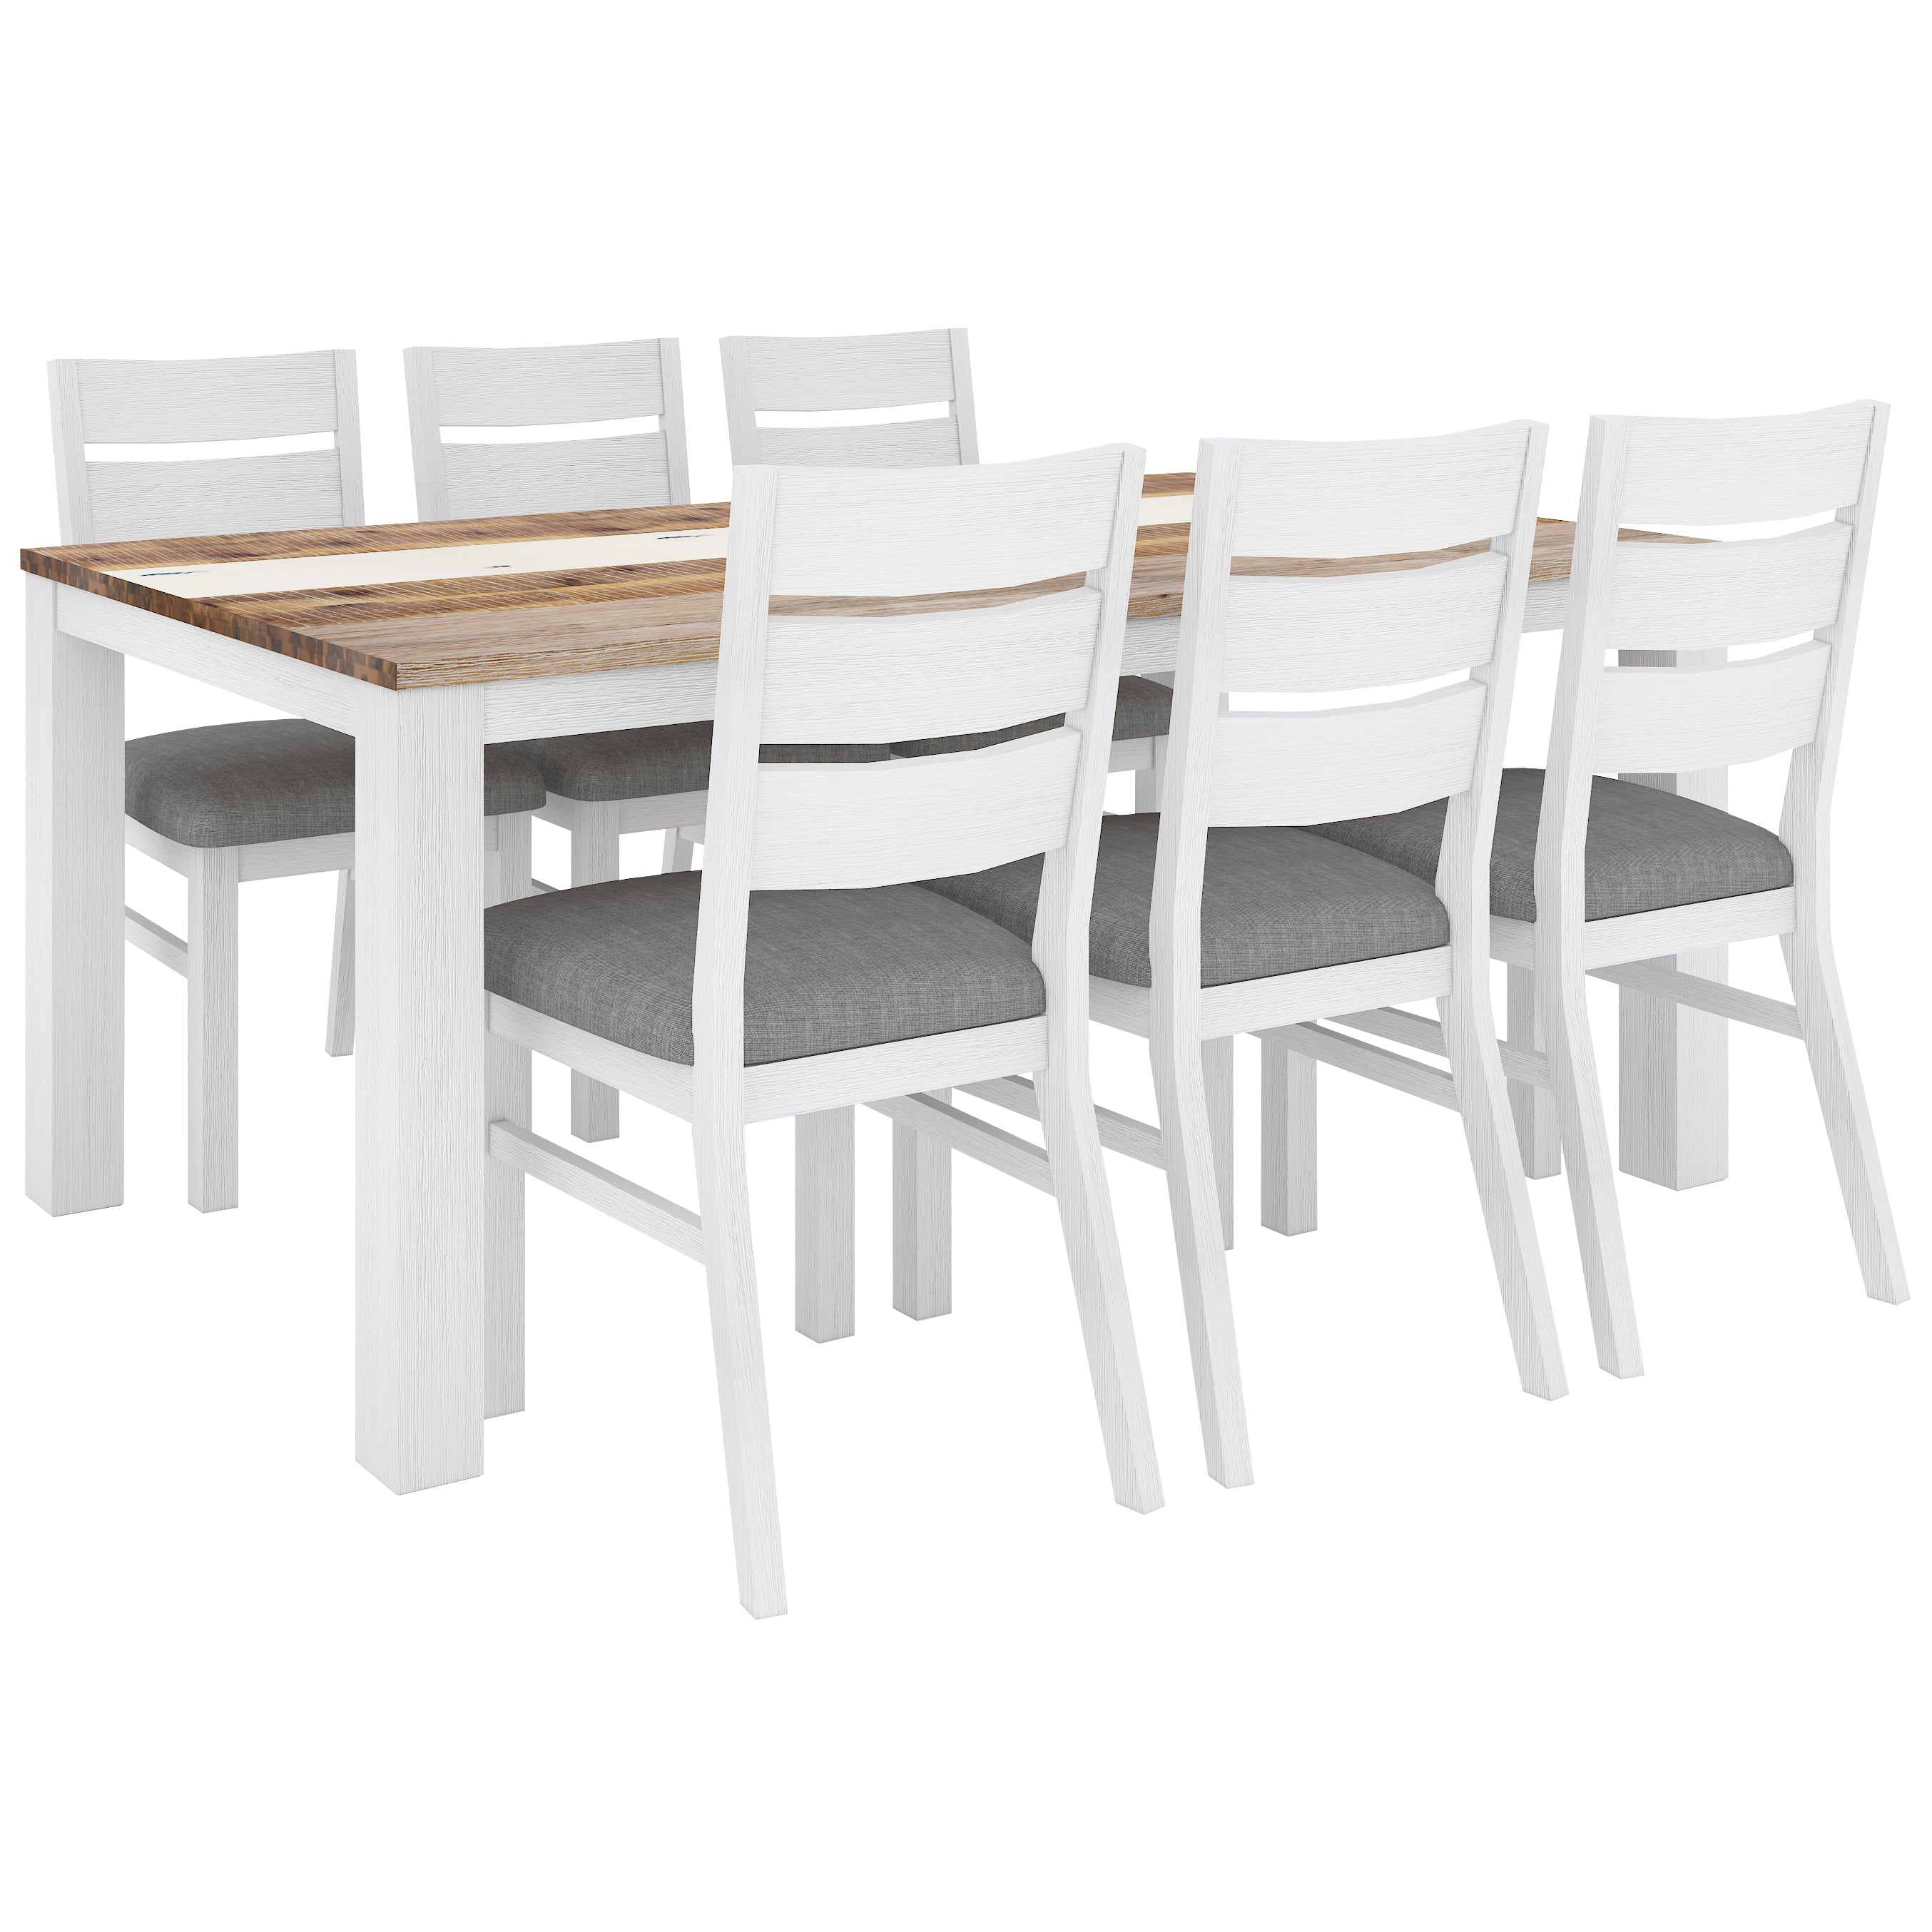 Orville 7pc Dining Set 180cm Table 6 Chair Solid Acacia Wood Timber -Multi Color - SILBERSHELL